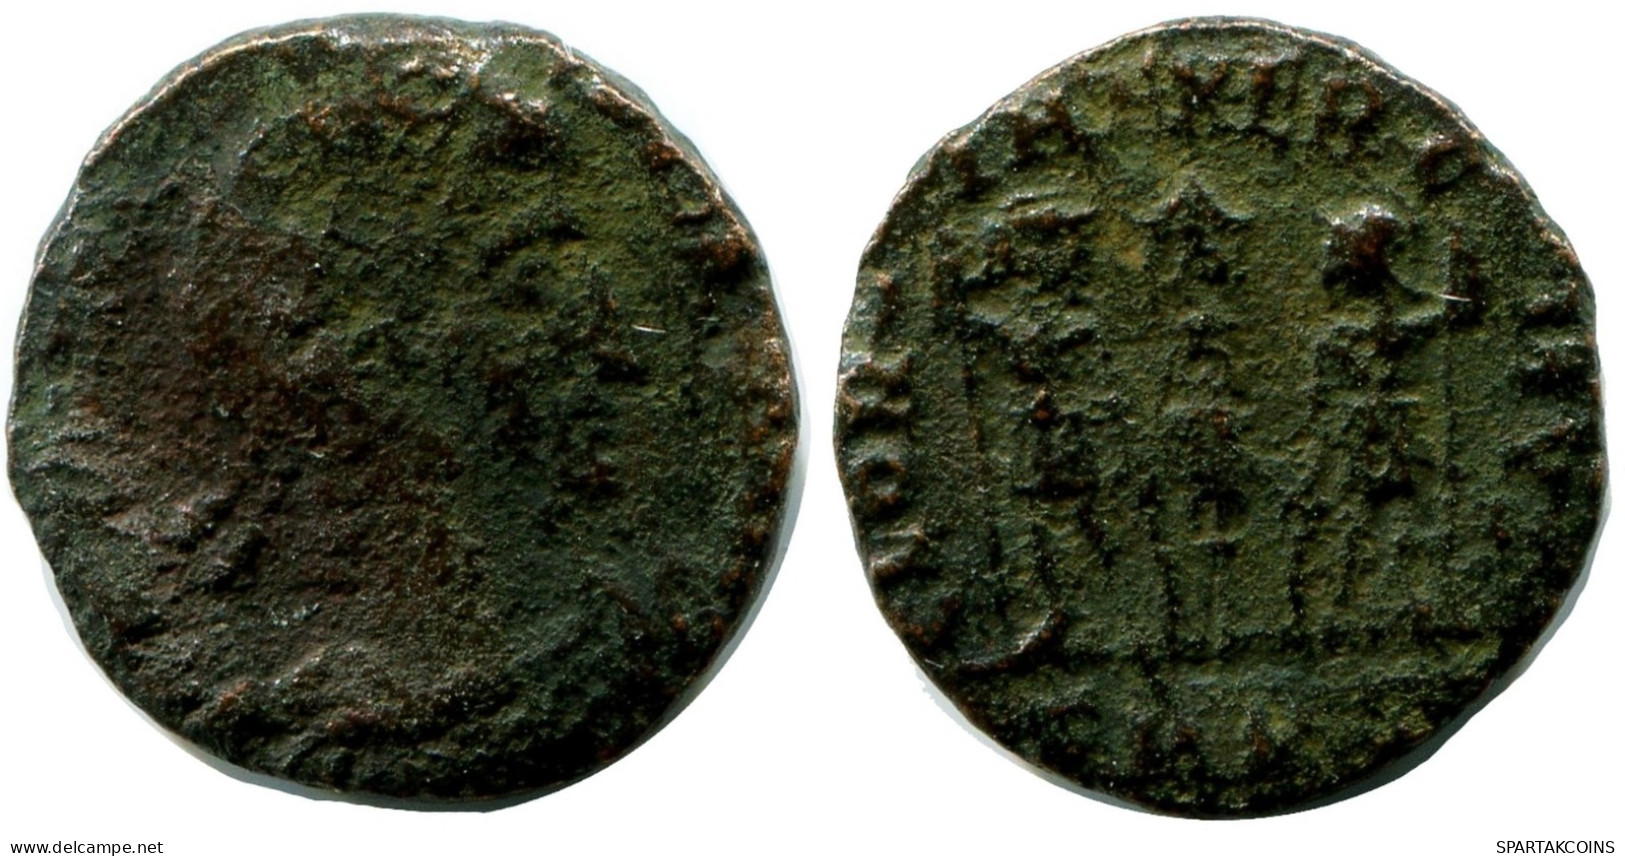 ROMAN Coin MINTED IN CYZICUS FOUND IN IHNASYAH HOARD EGYPT #ANC11047.14.D.A - L'Empire Chrétien (307 à 363)